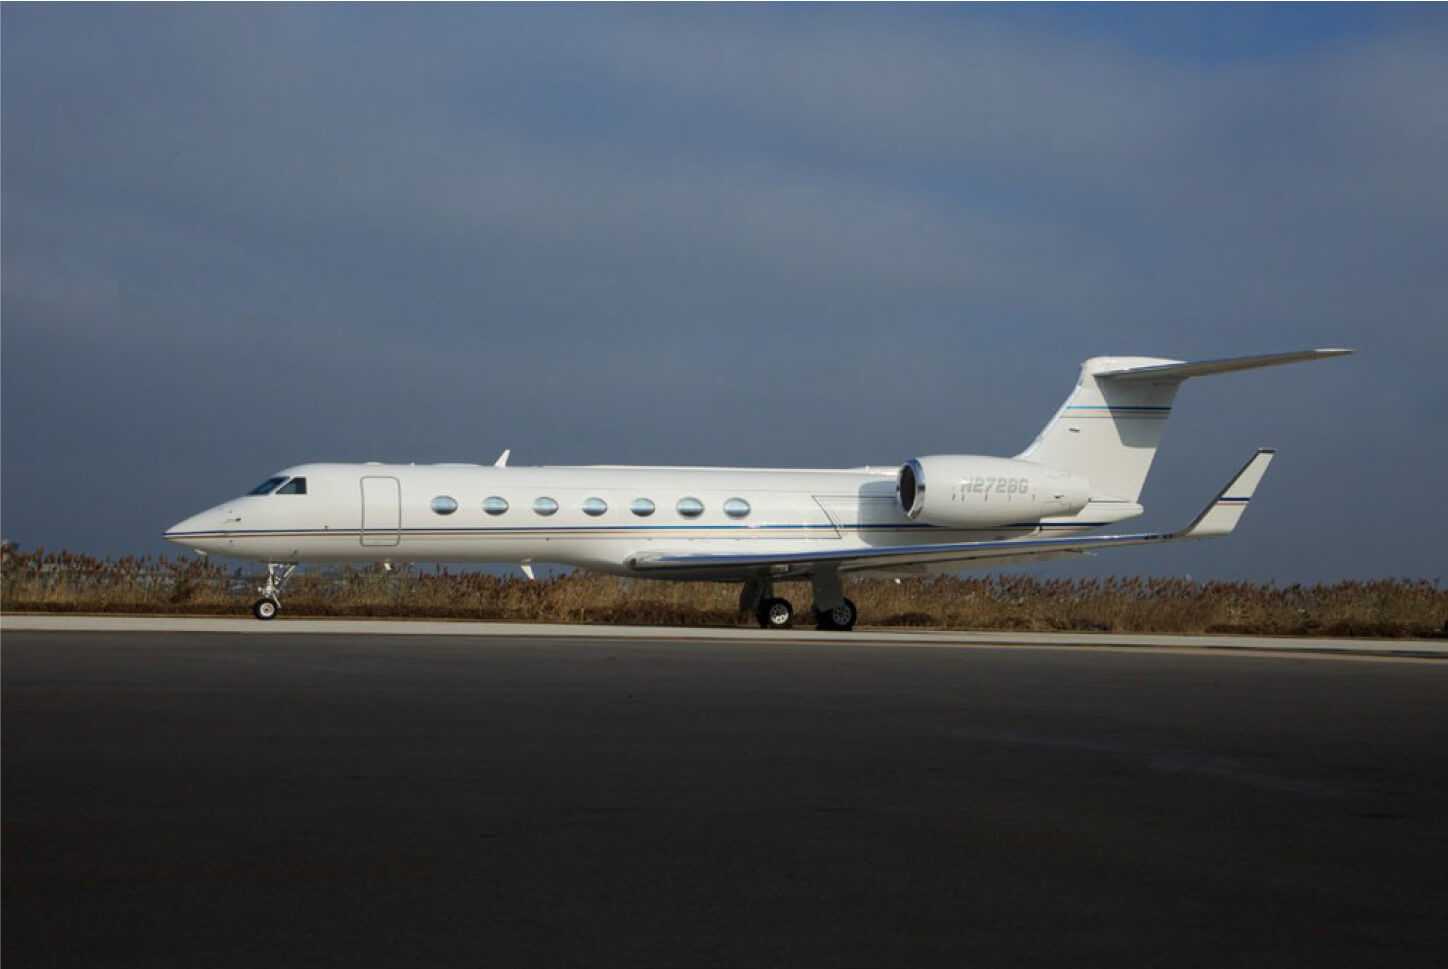 A Gulfstream G550 Model in White Color on Runway